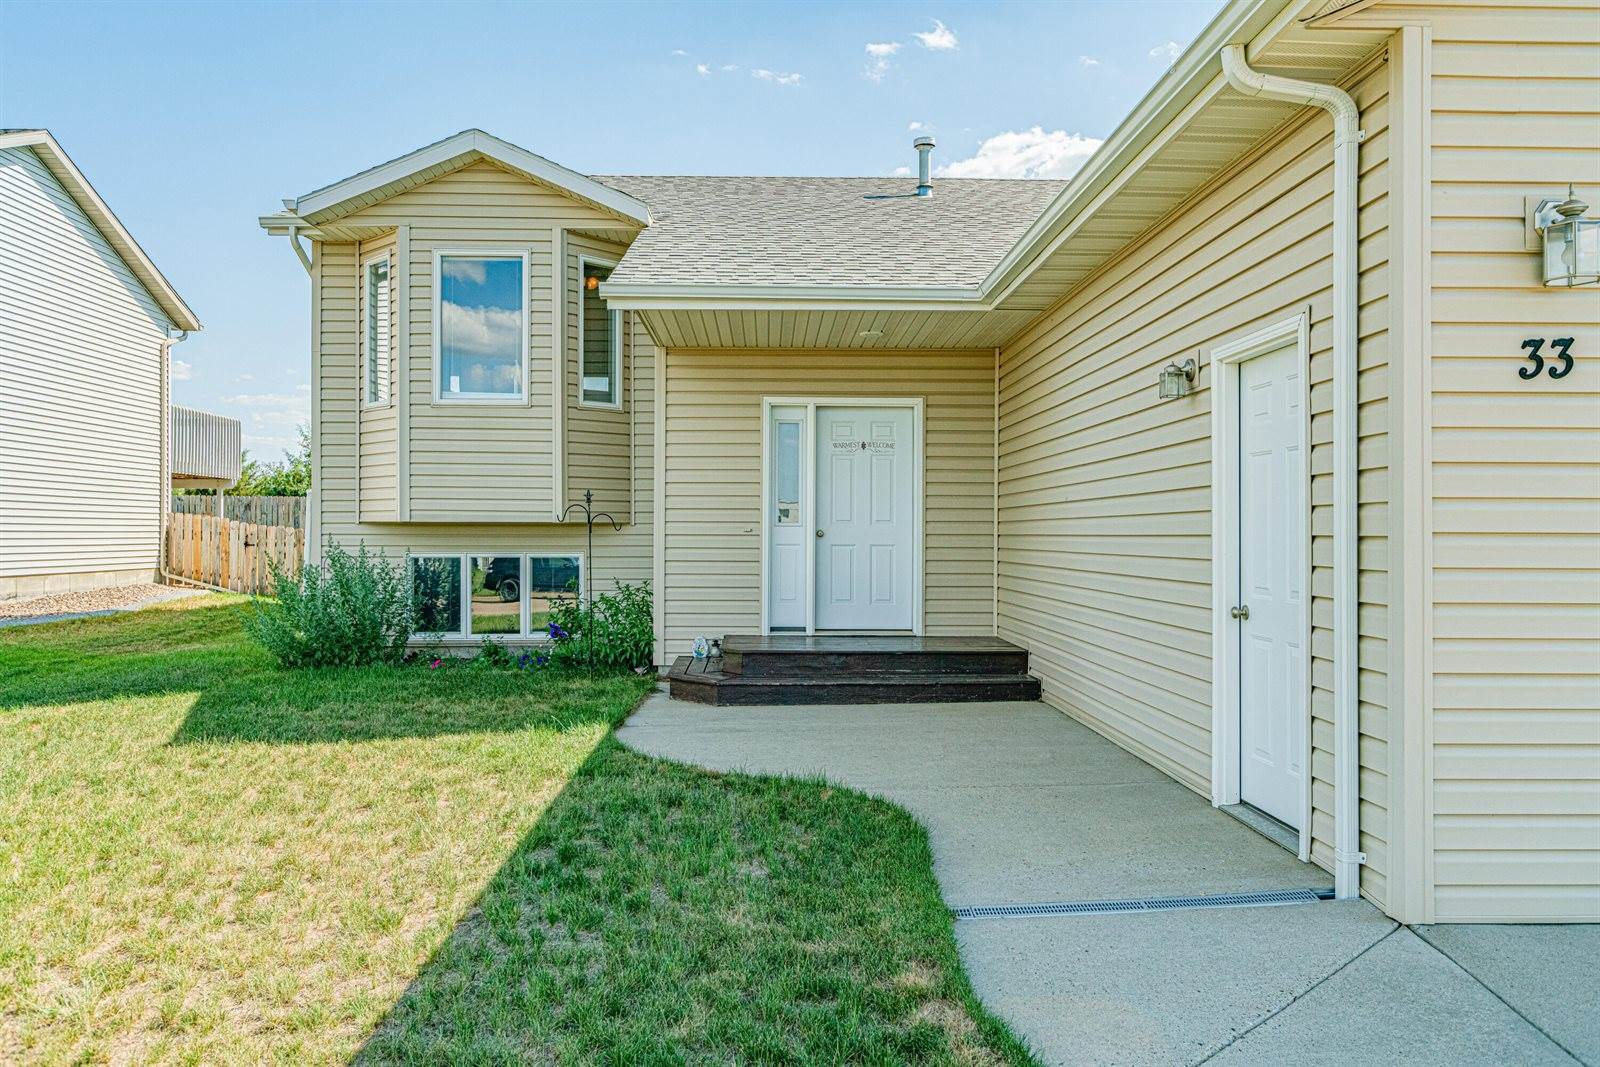 33 Mcginnis Way, Lincoln, ND 58504